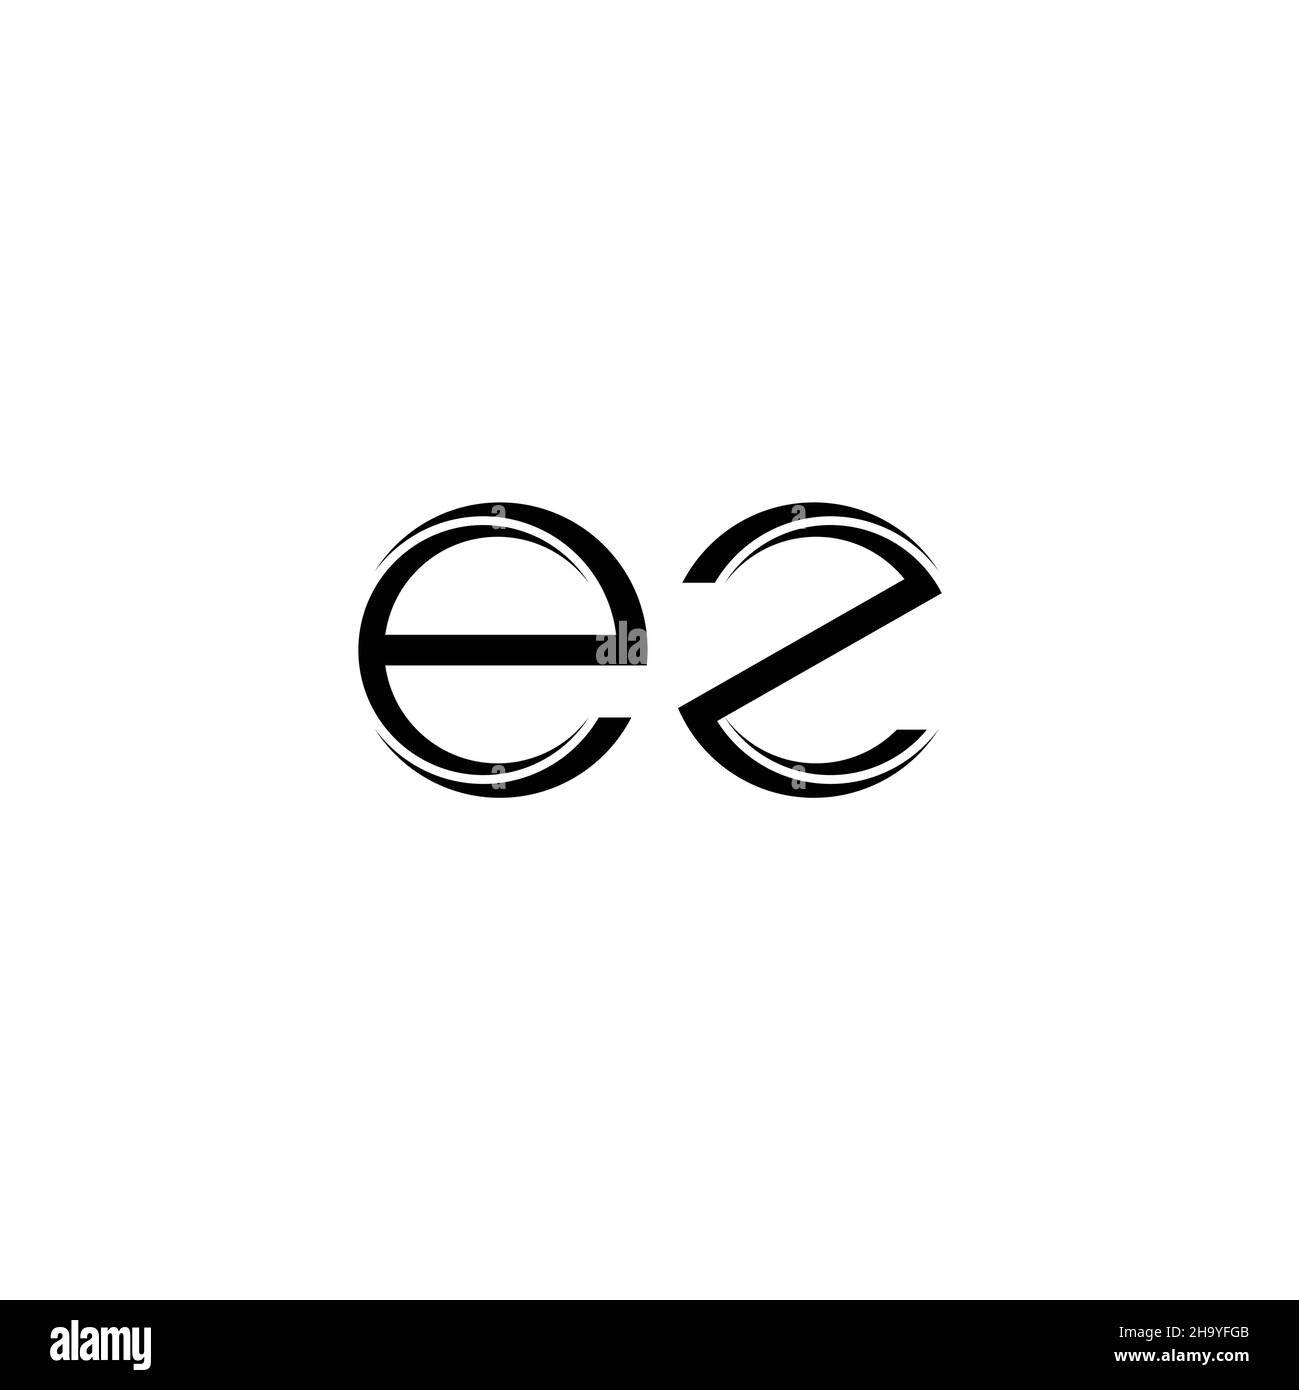 EZ Logo monogram with slice rounded modern design template isolated on